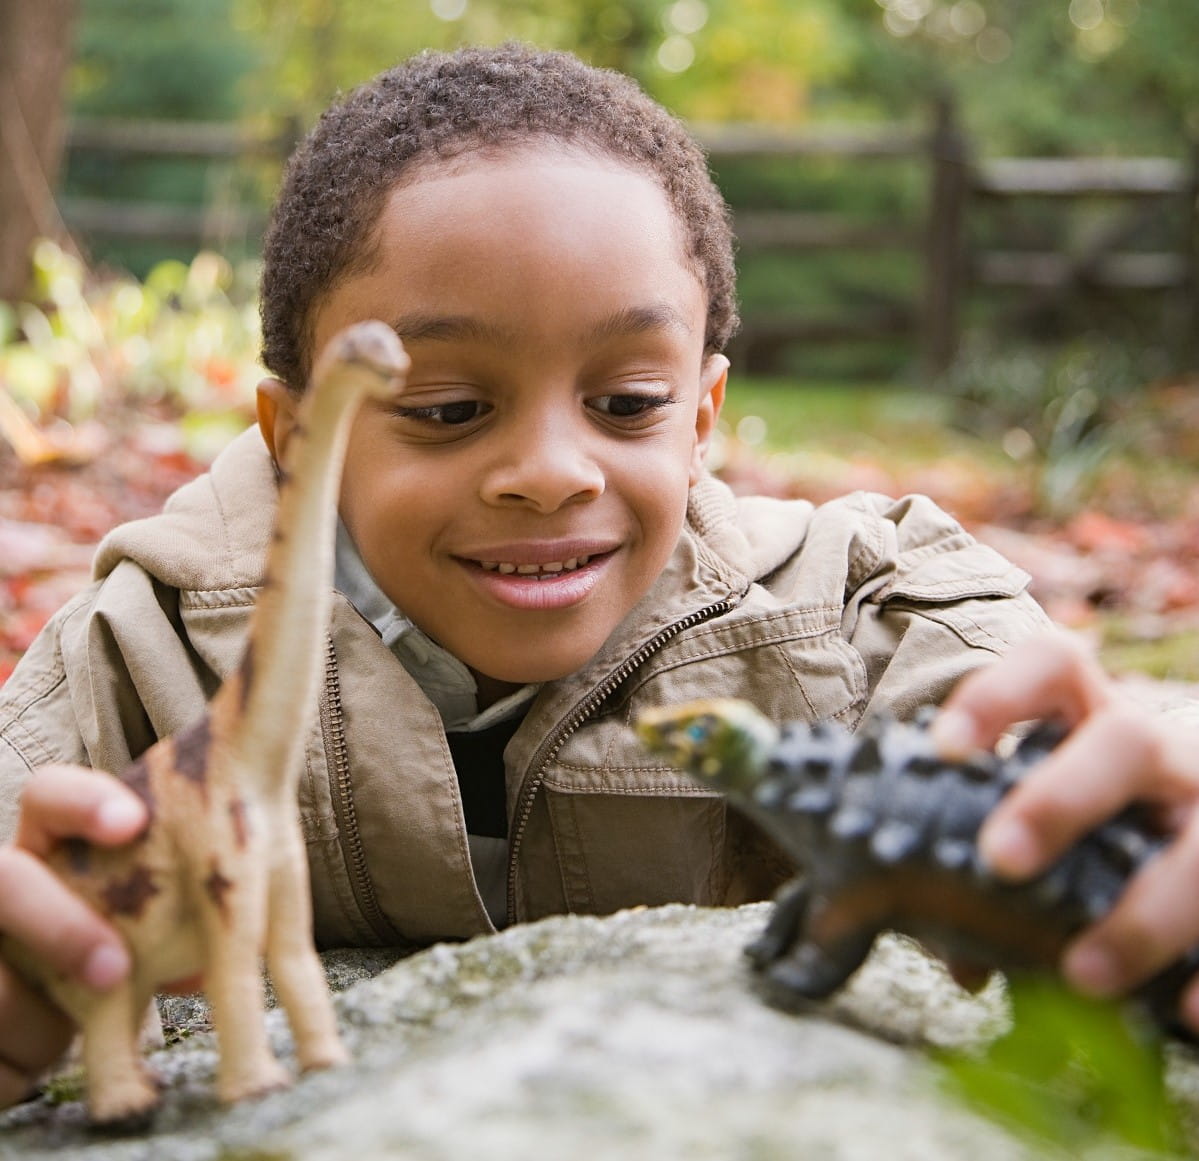 6 outdoor toys and sensory play ideas for kids